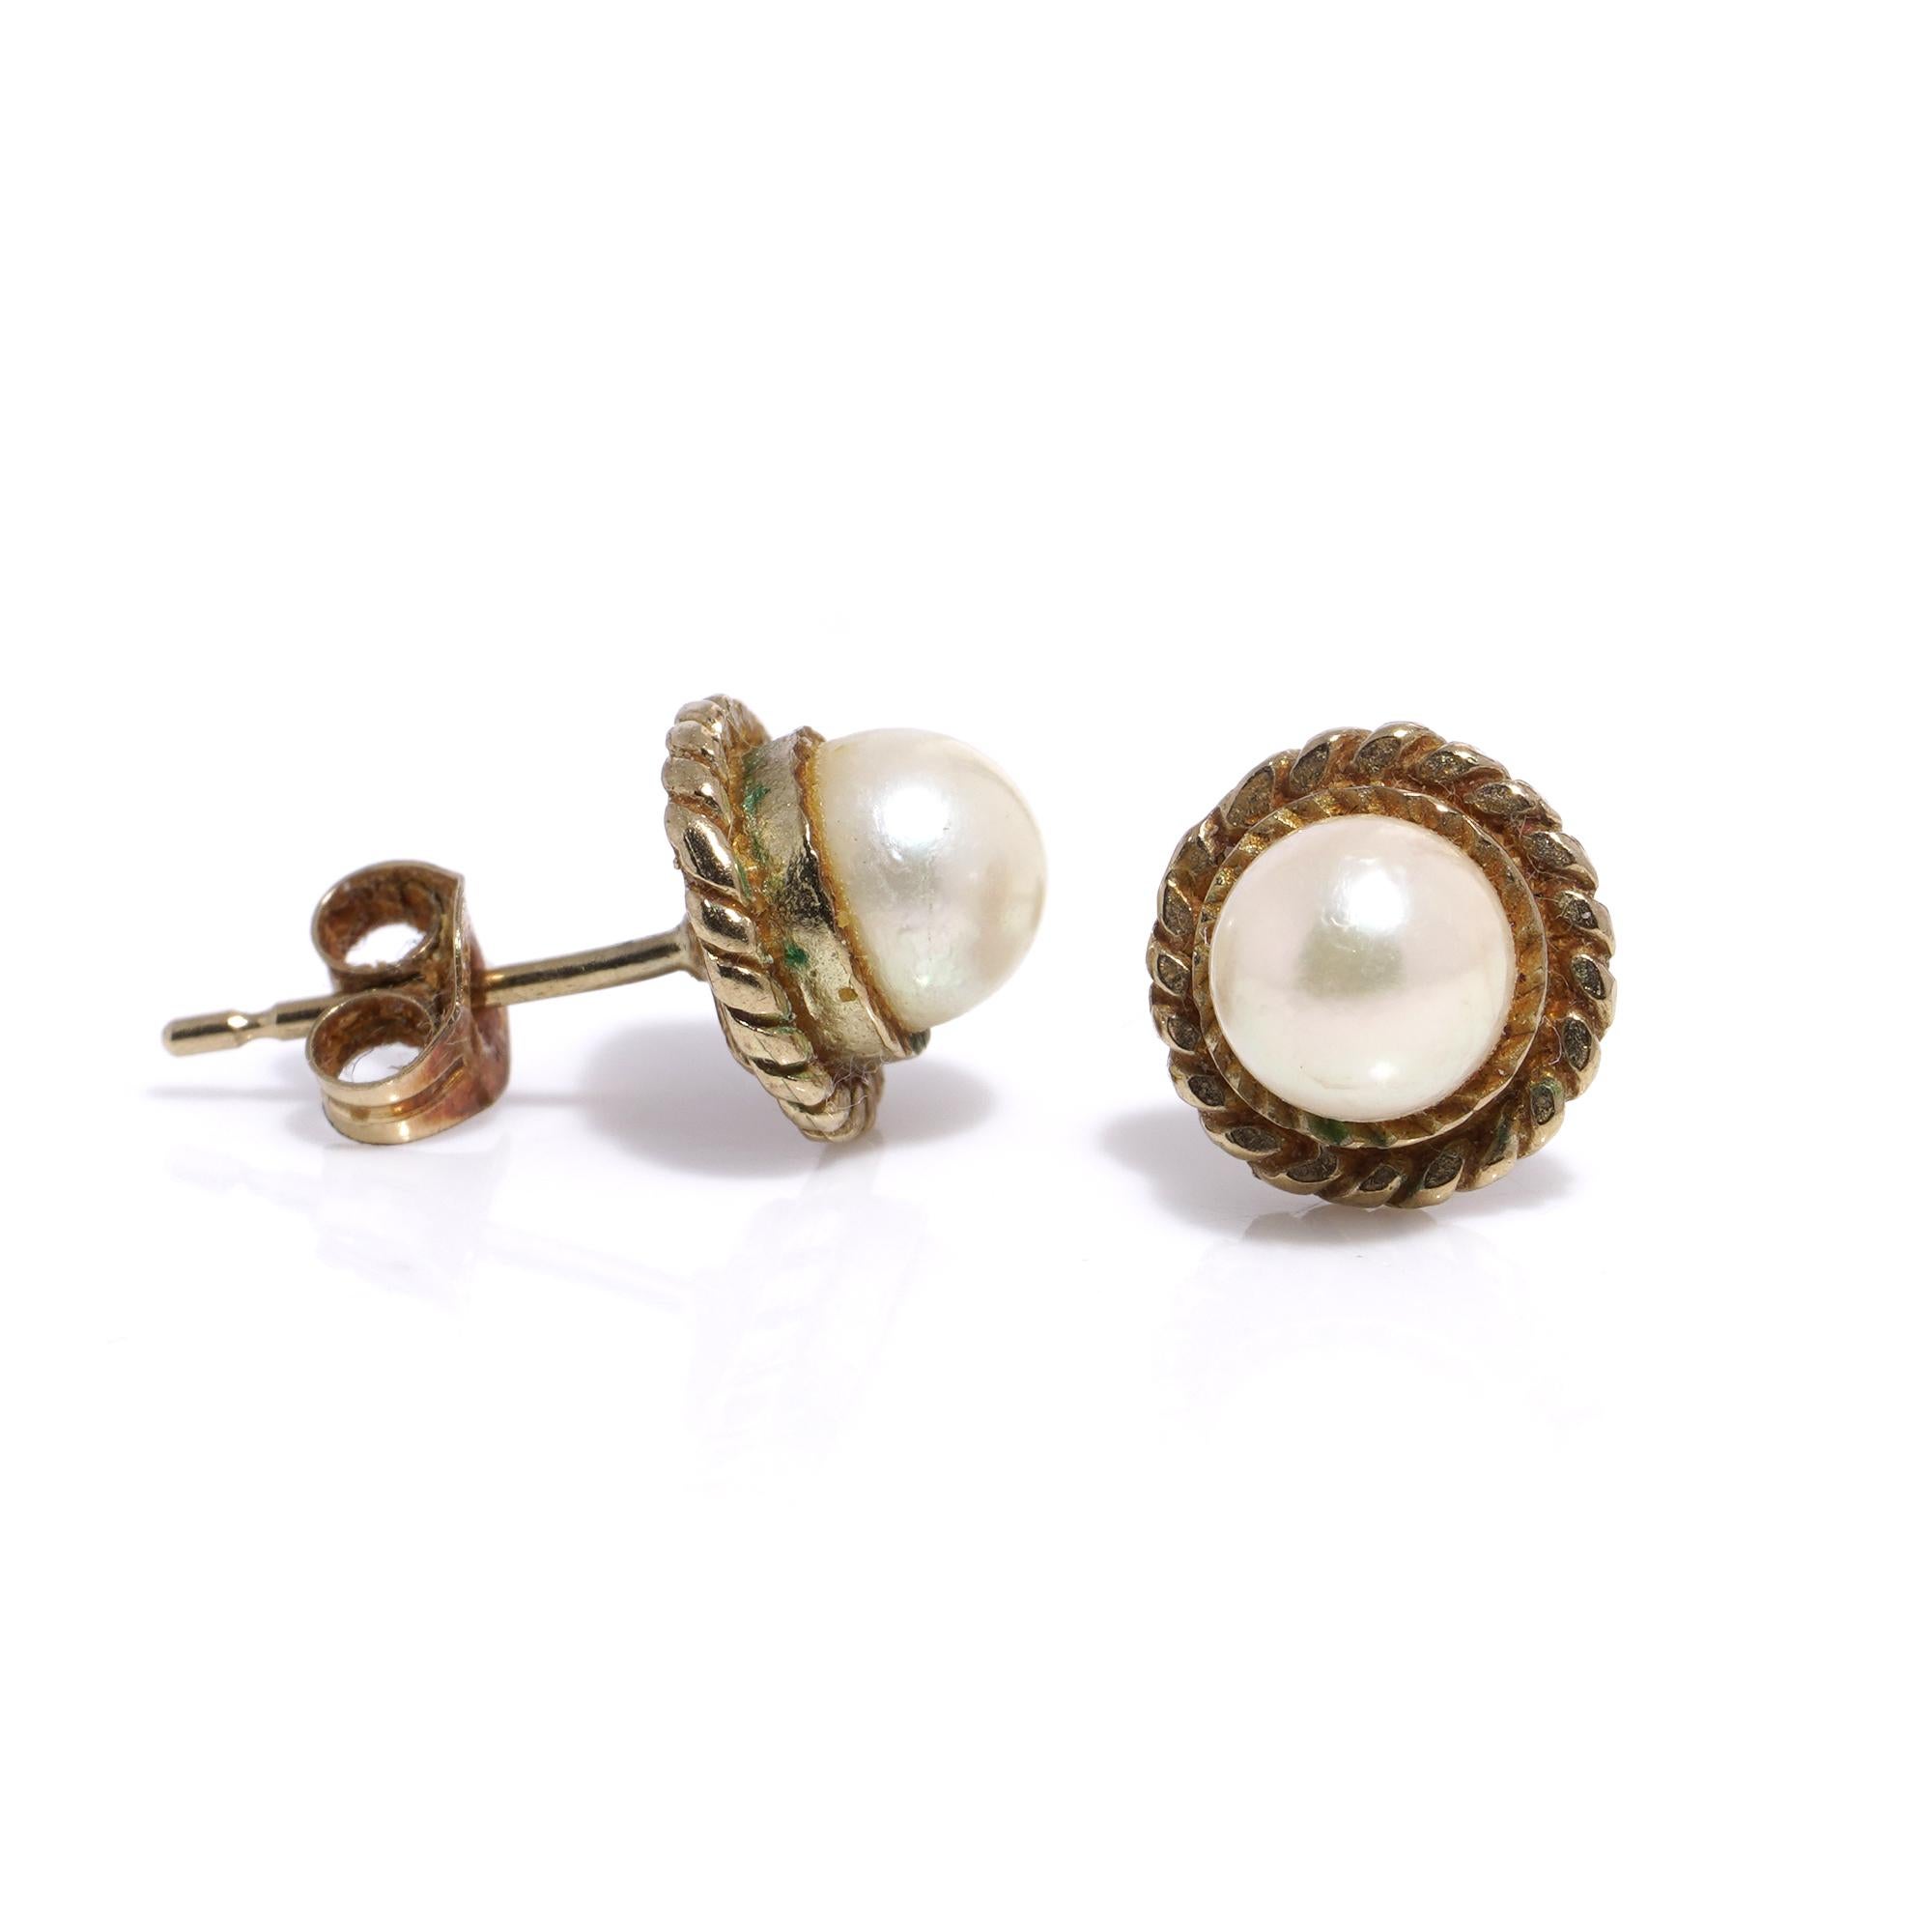 Vintage 9kt yellow gold pair of pearl studs.
X-Ray tested positive for 9kt. gold.
Butterflies are hallmarked with 9kt. gold.

Dimensions -
Diameter: 7 mm
Weight: 1 gram

Pearl size: 5 mm in diameter

Condition: The earrings are pre-owned, with minor